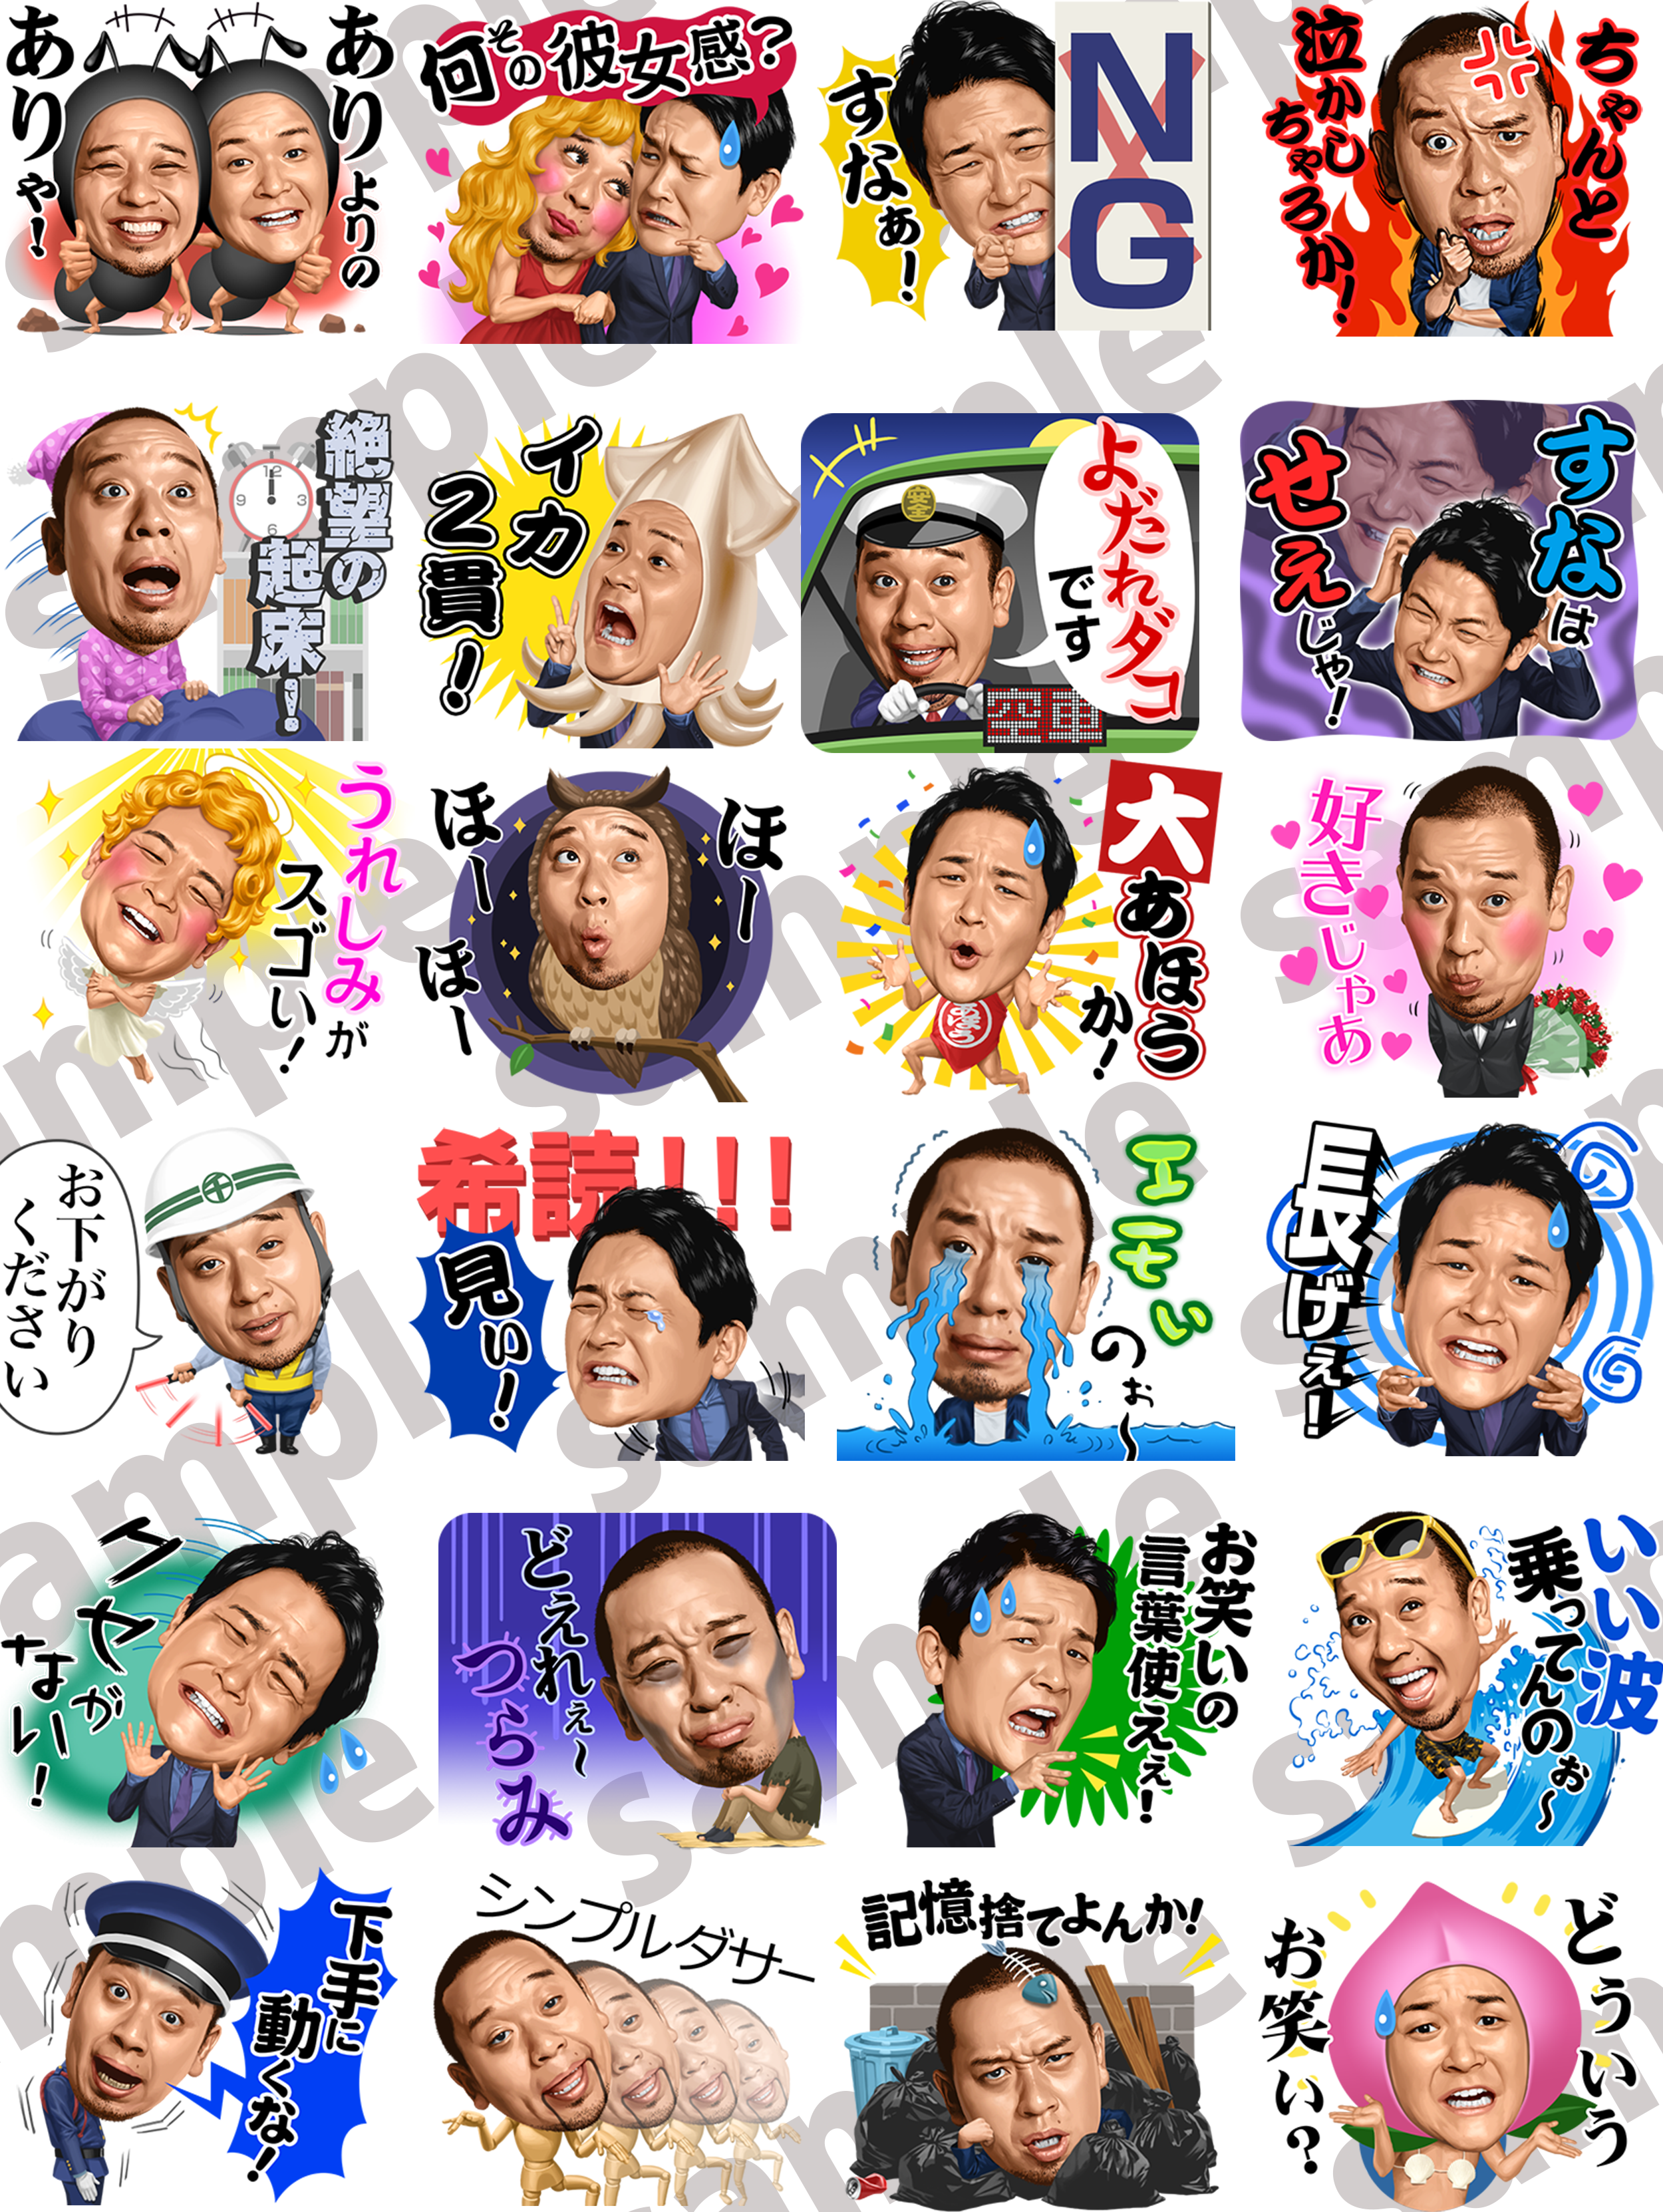 http://news.yoshimoto.co.jp/20181024144722-f6c8b50edb50aee02bf5386e1d97e5157abc594c.png